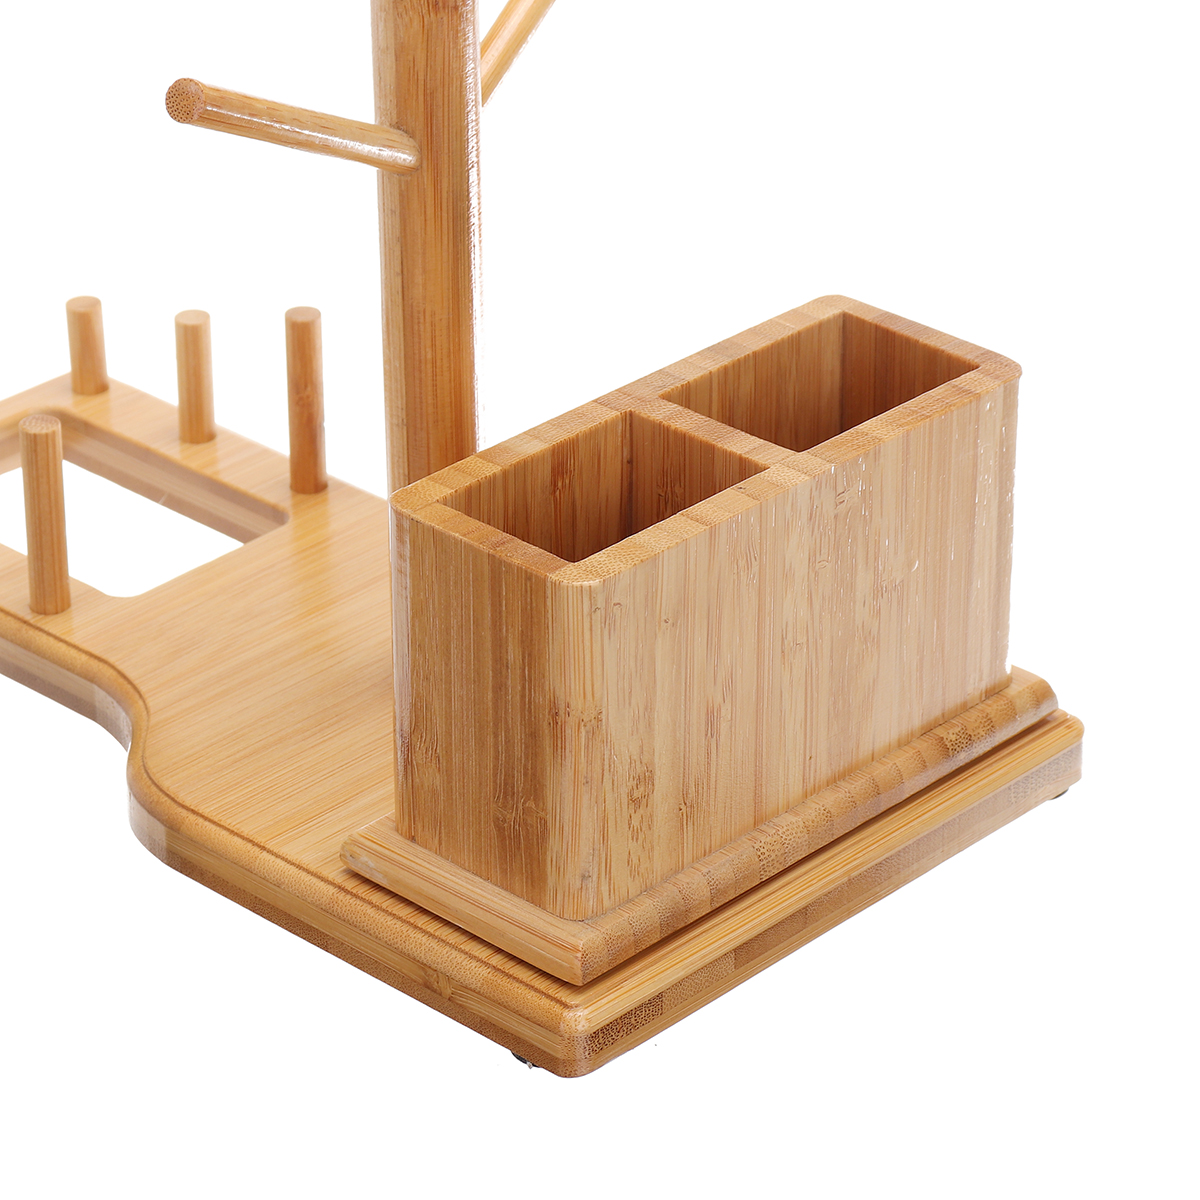 Bamboo-Cup-Mat-Water-Cup-Storage-Rack-Creative-Cup-Organizing-Shelf-Household-Office-Living-Wooden-G-1756070-3